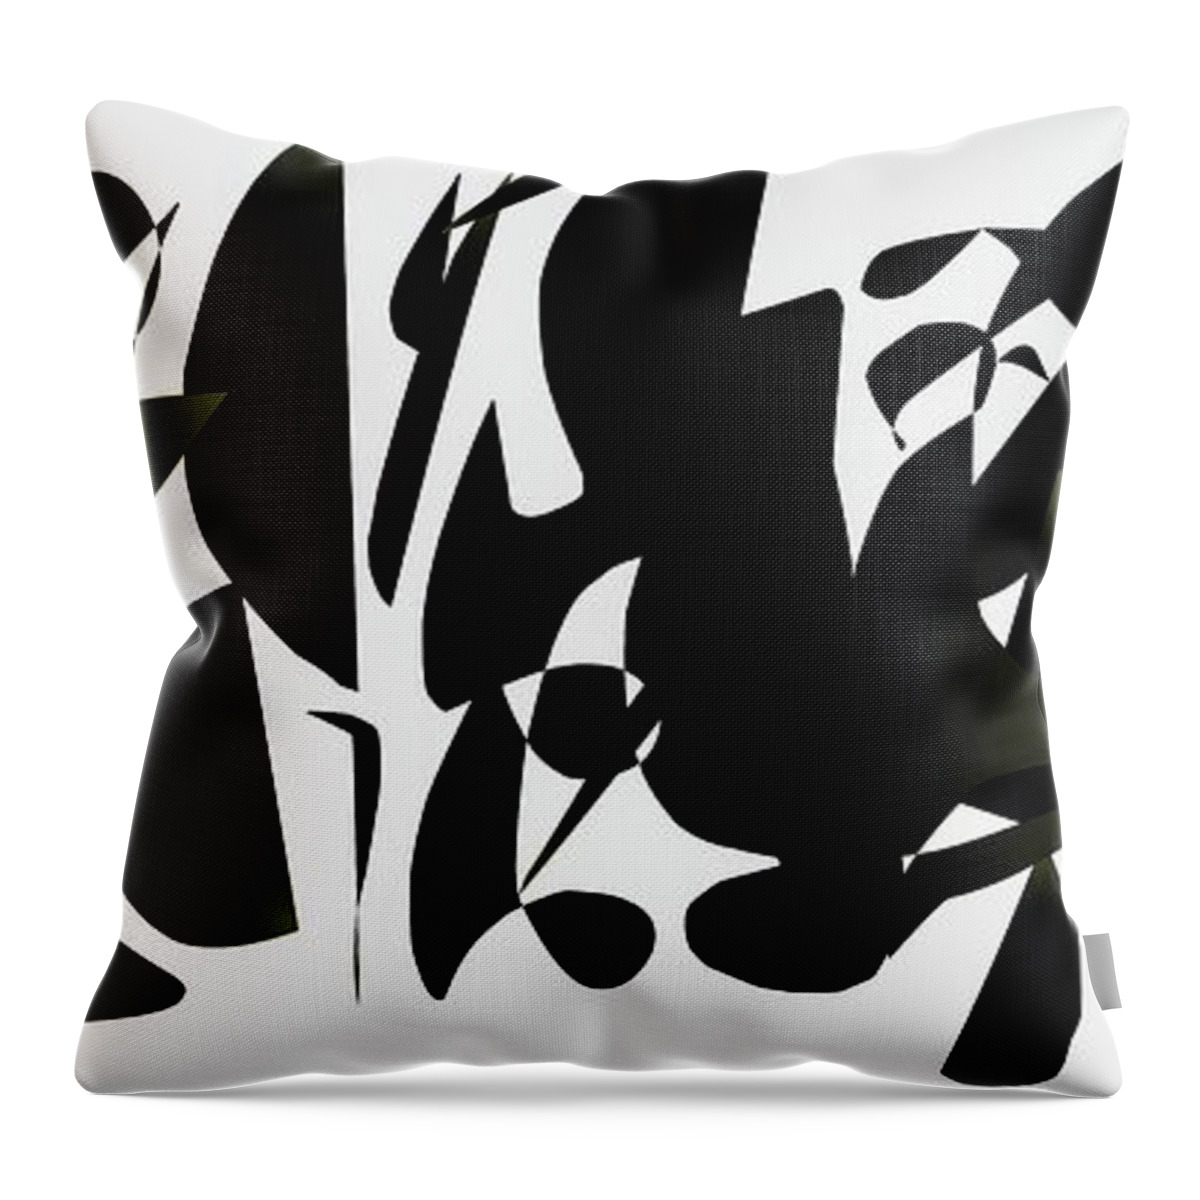 Pets Art Throw Pillow featuring the digital art Black And White Photography by Callie E Austin